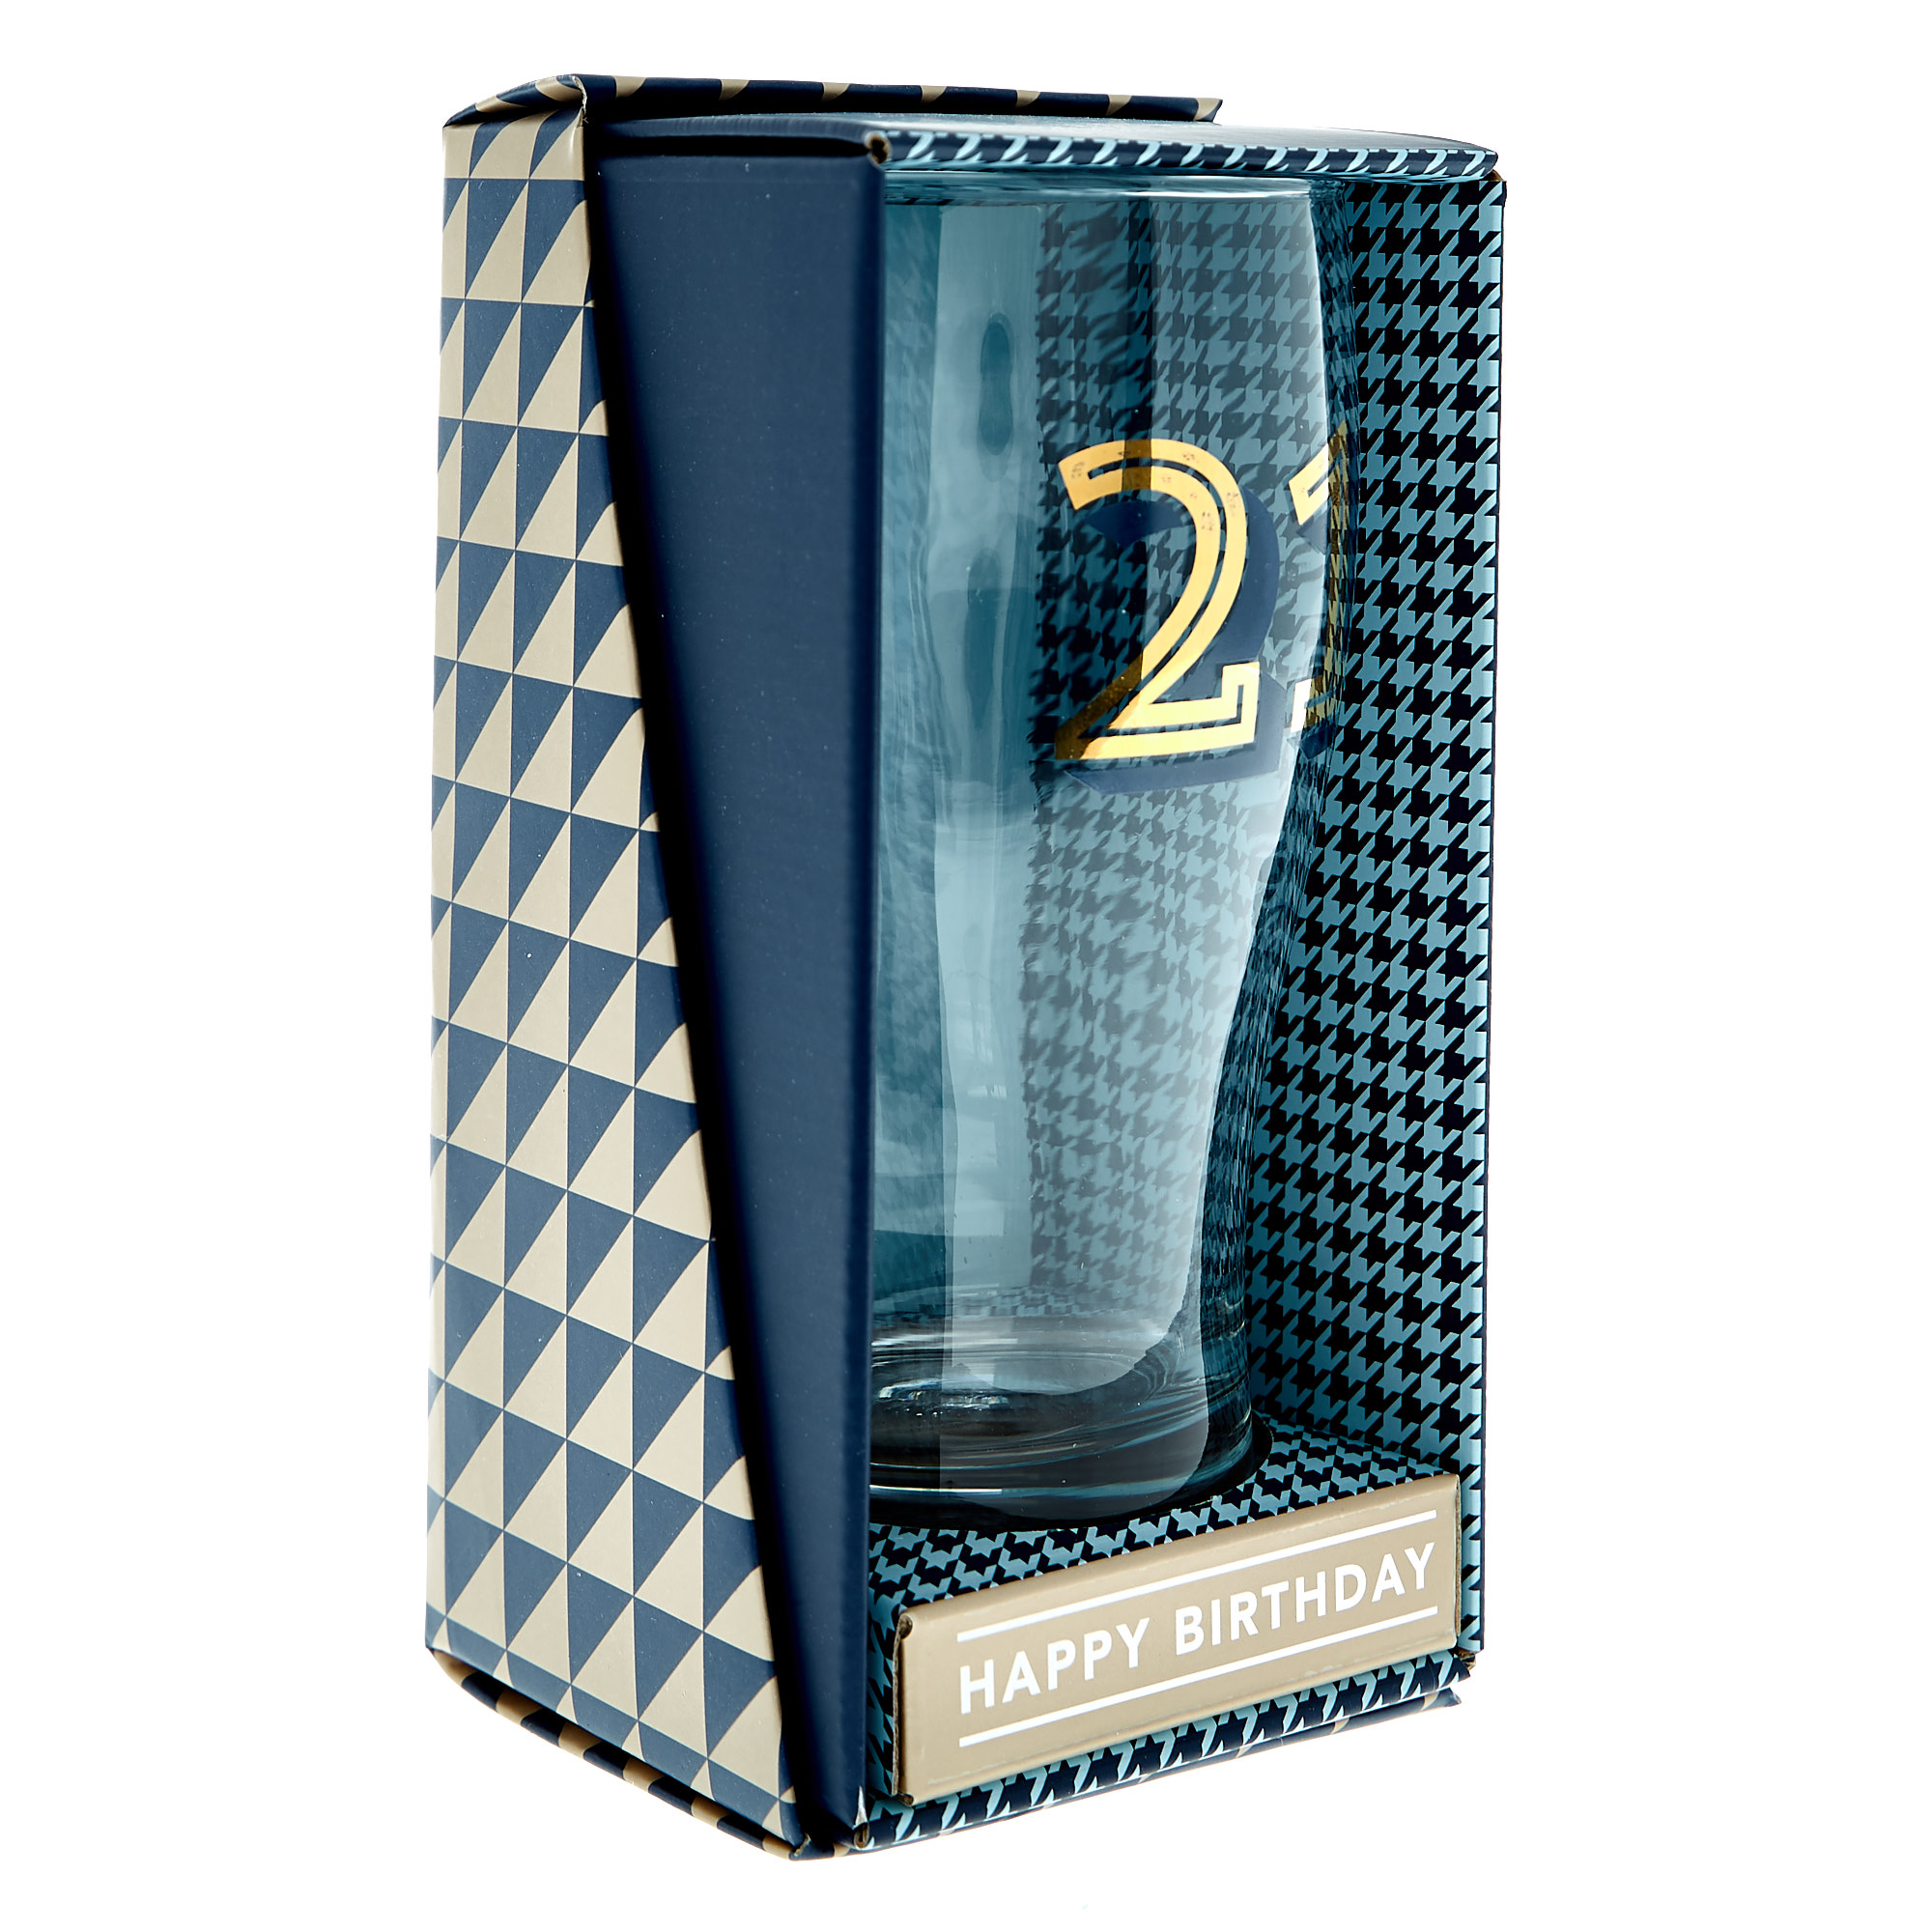 21st Birthday Pint Glass In A Box - Blue & Gold 